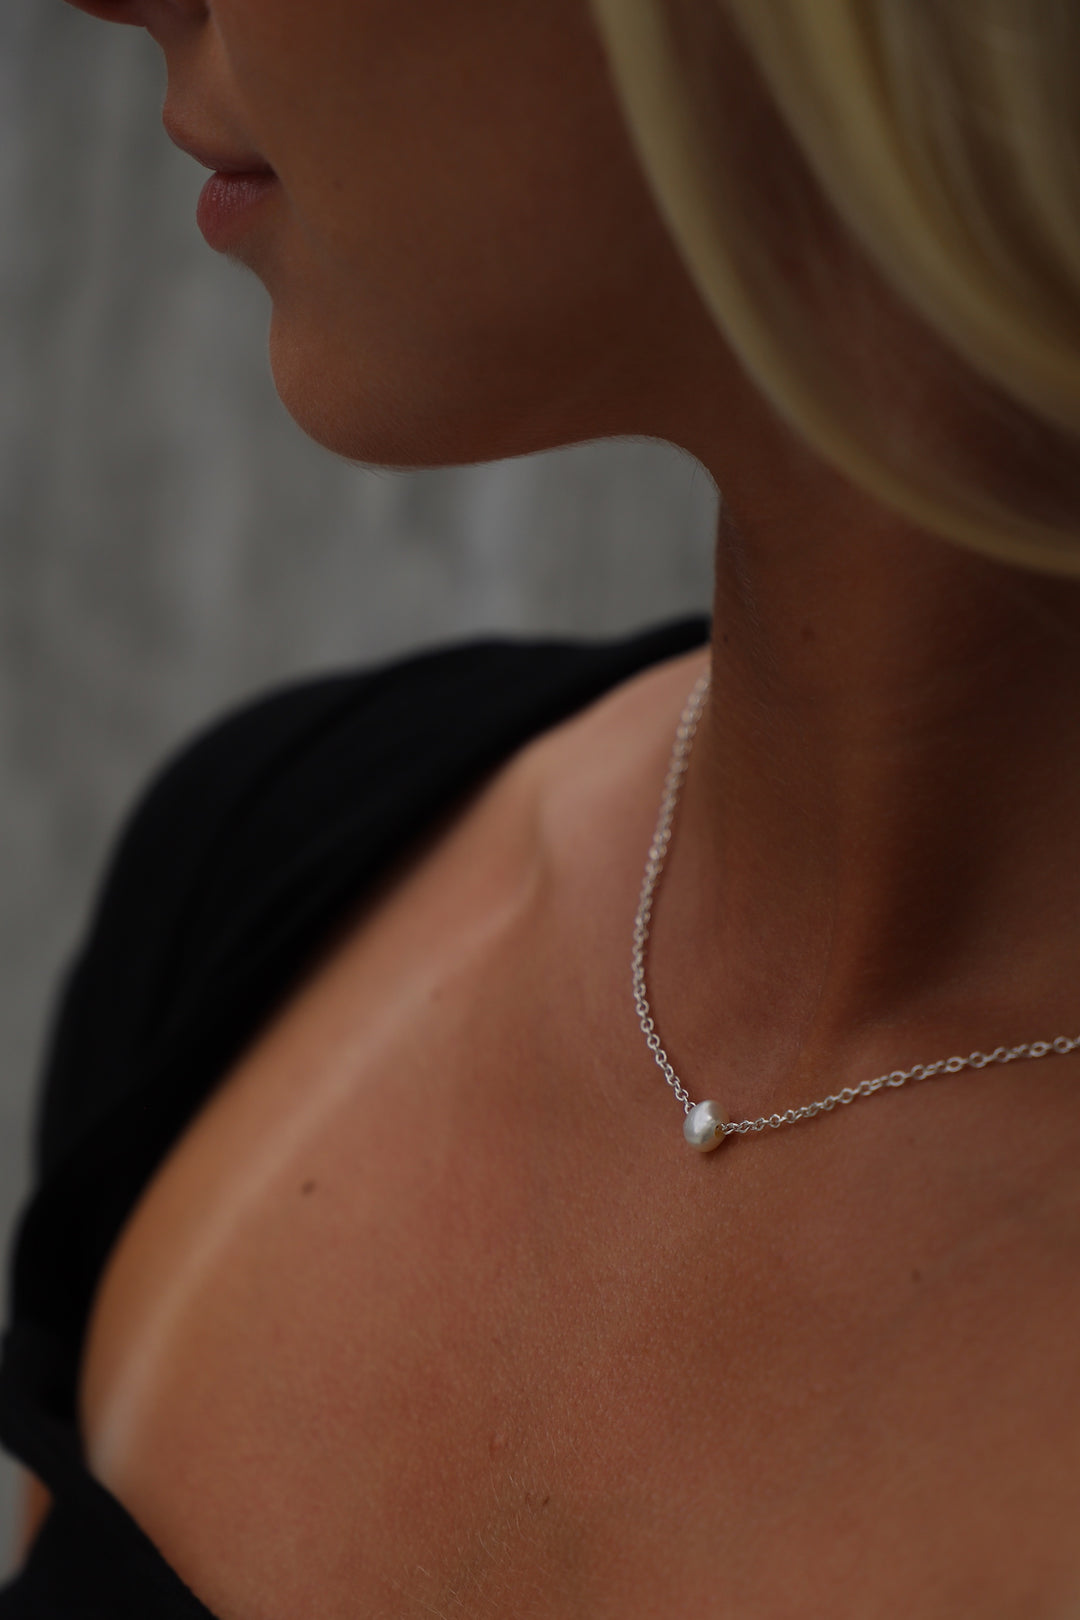 THE PEARL COVE NECKLACE